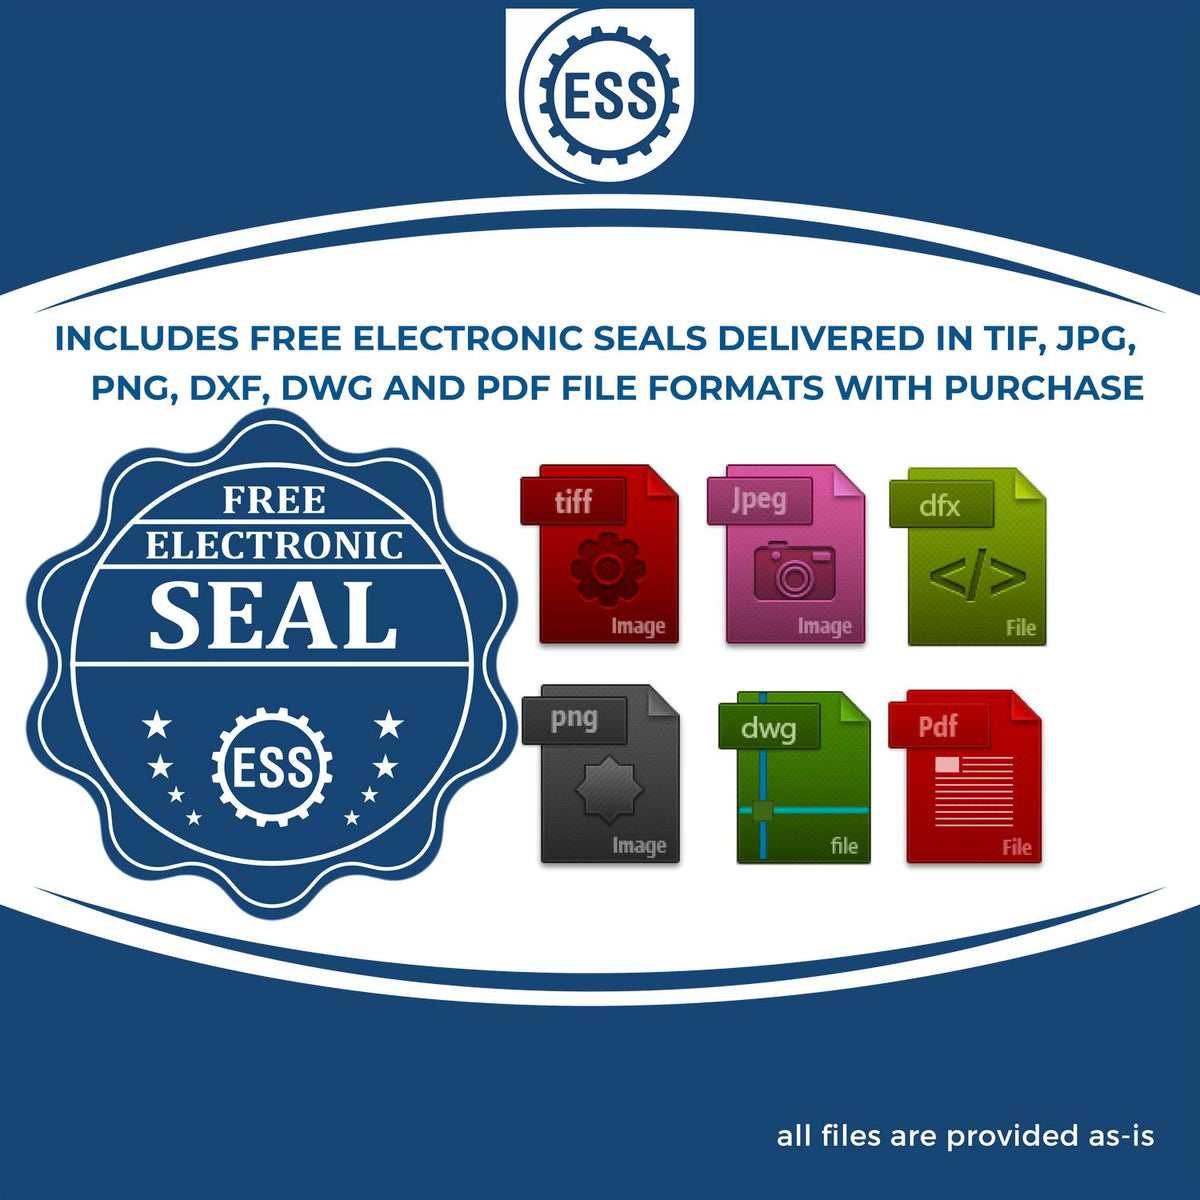 An infographic for the free electronic seal for the Handheld Illinois Professional Geologist Embosser illustrating the different file type icons such as DXF, DWG, TIF, JPG and PNG.